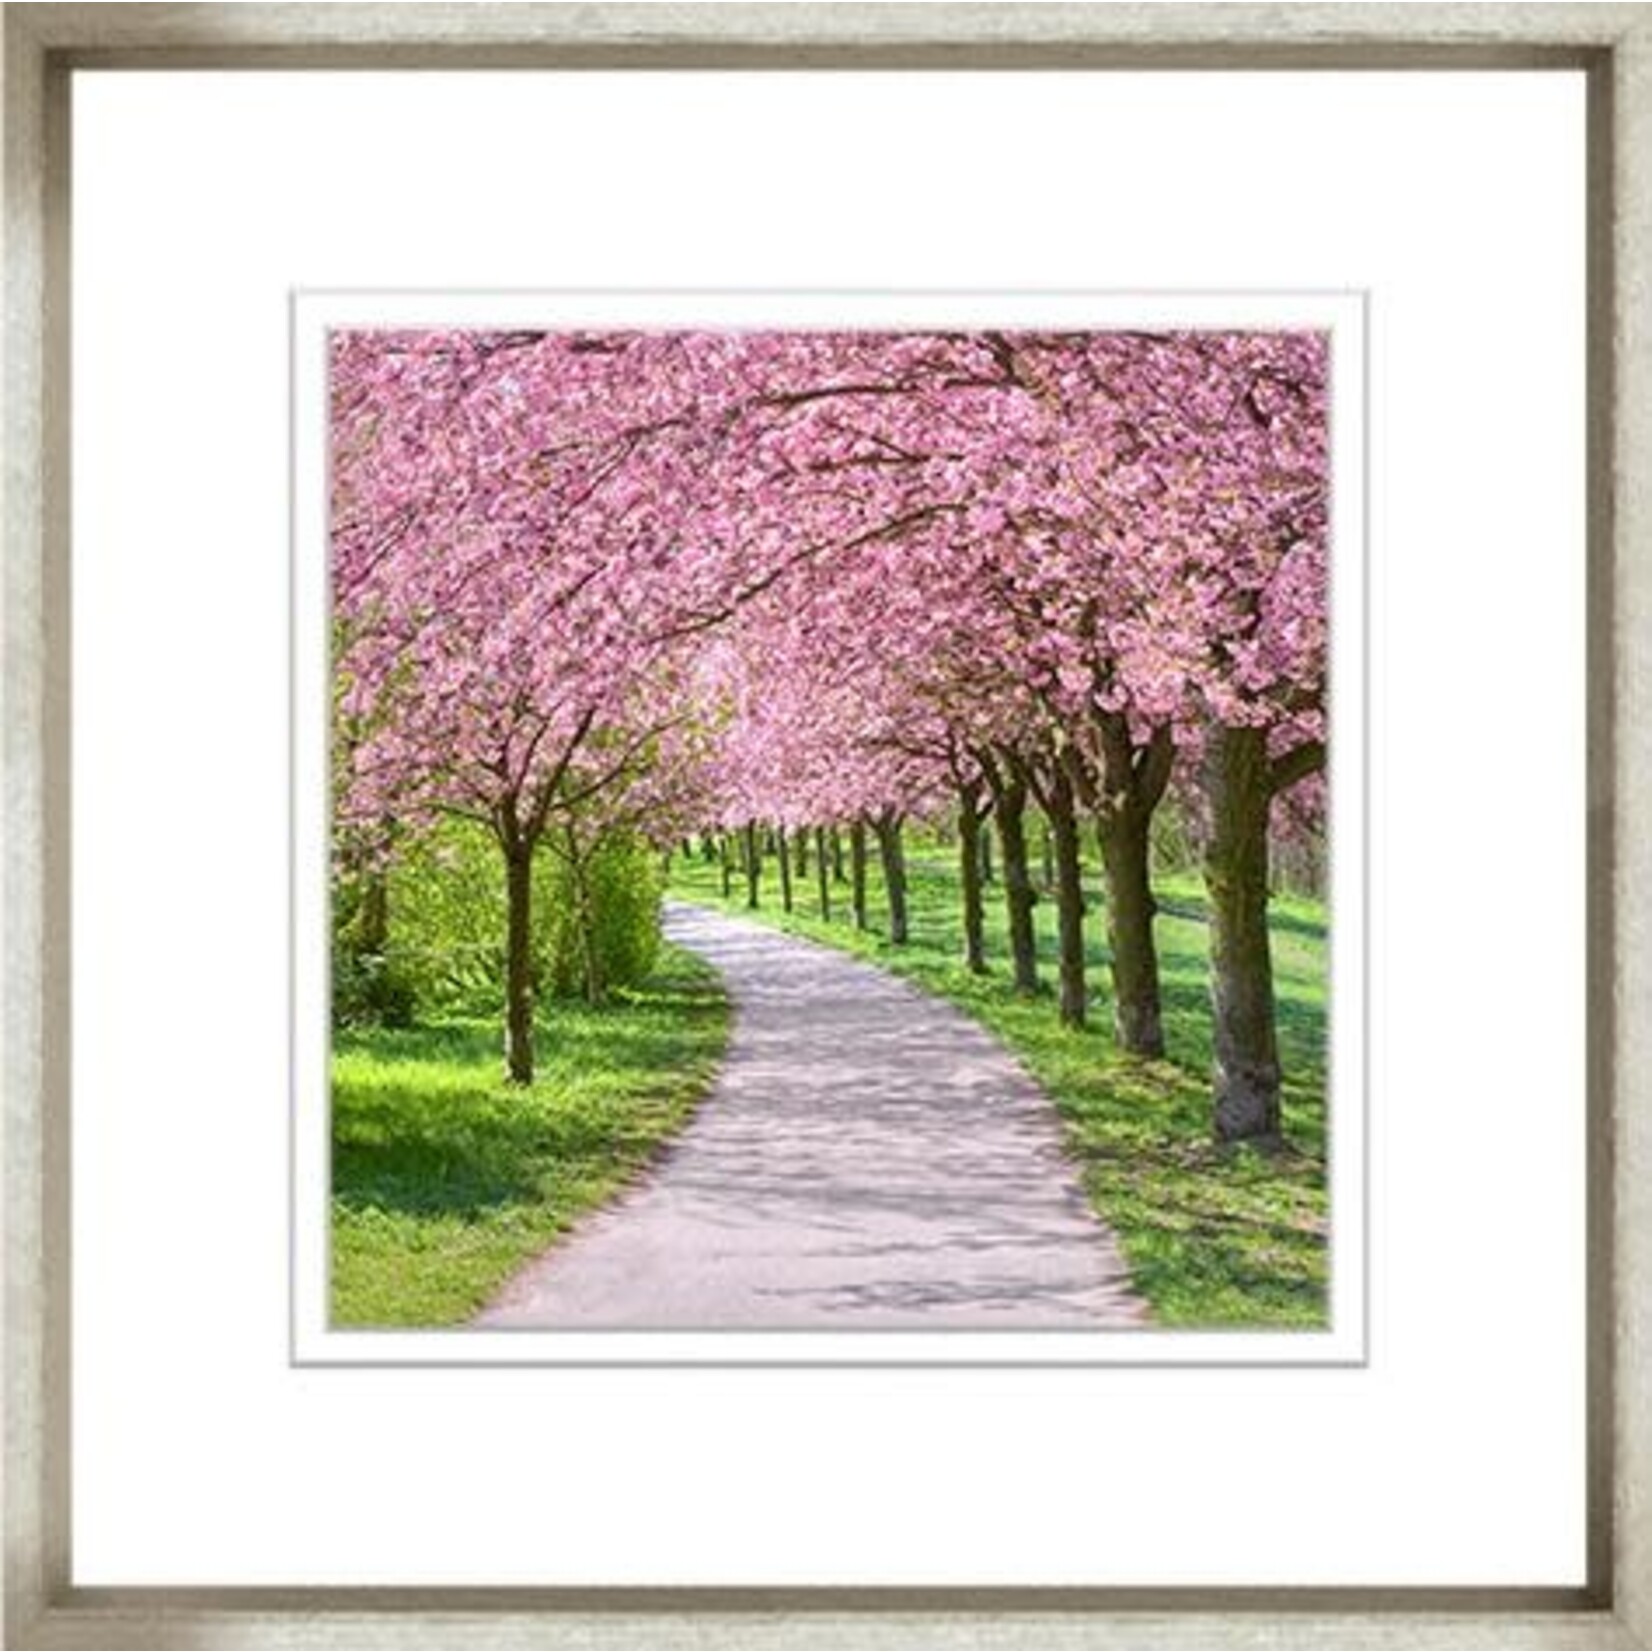 Trowbridge Gallery Colourful Tree Collection Pink Cherry Trees Framed Artwork 7